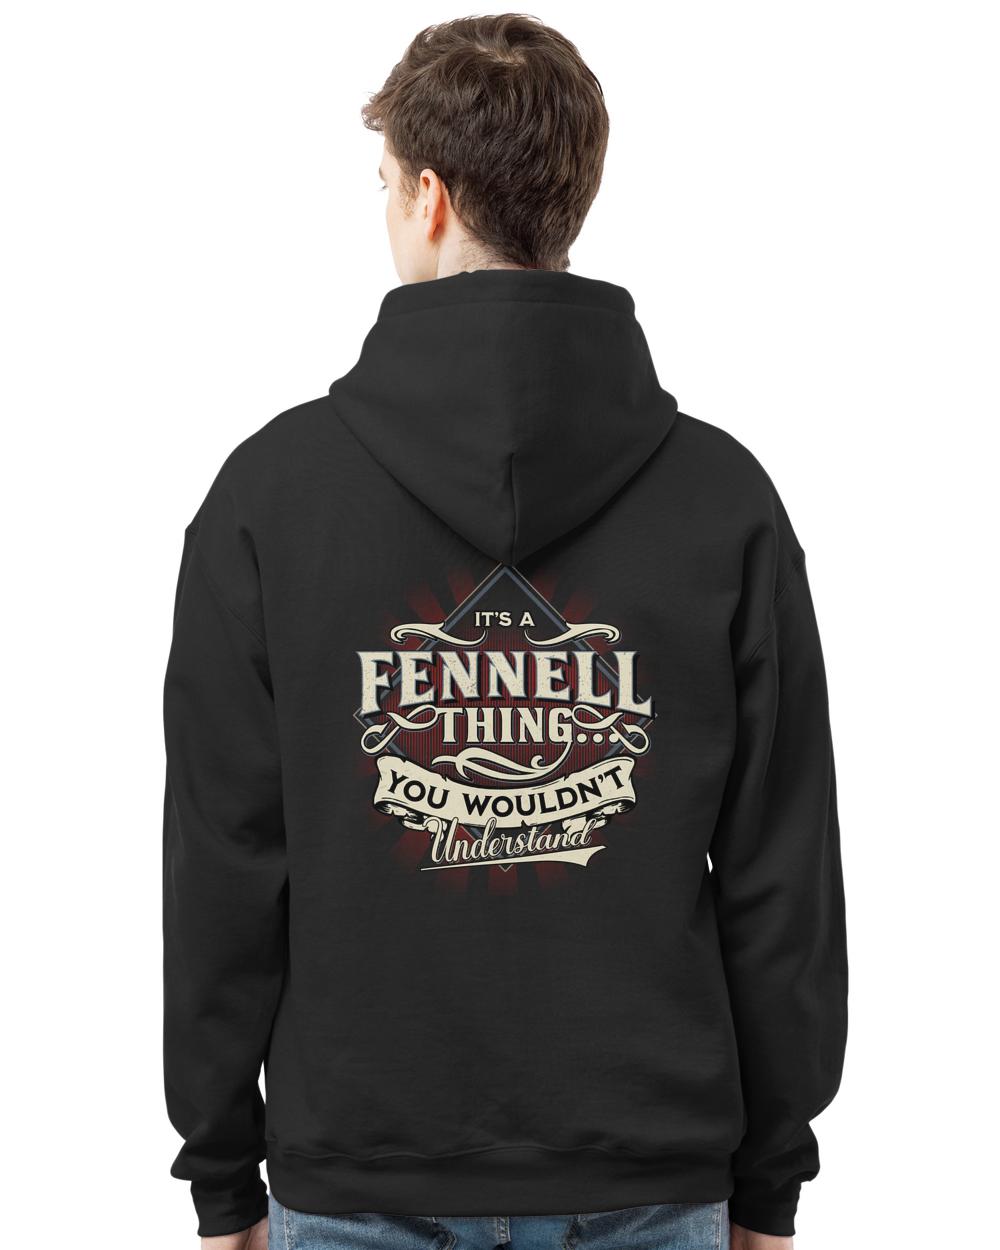 FENNELL-13K-44-01